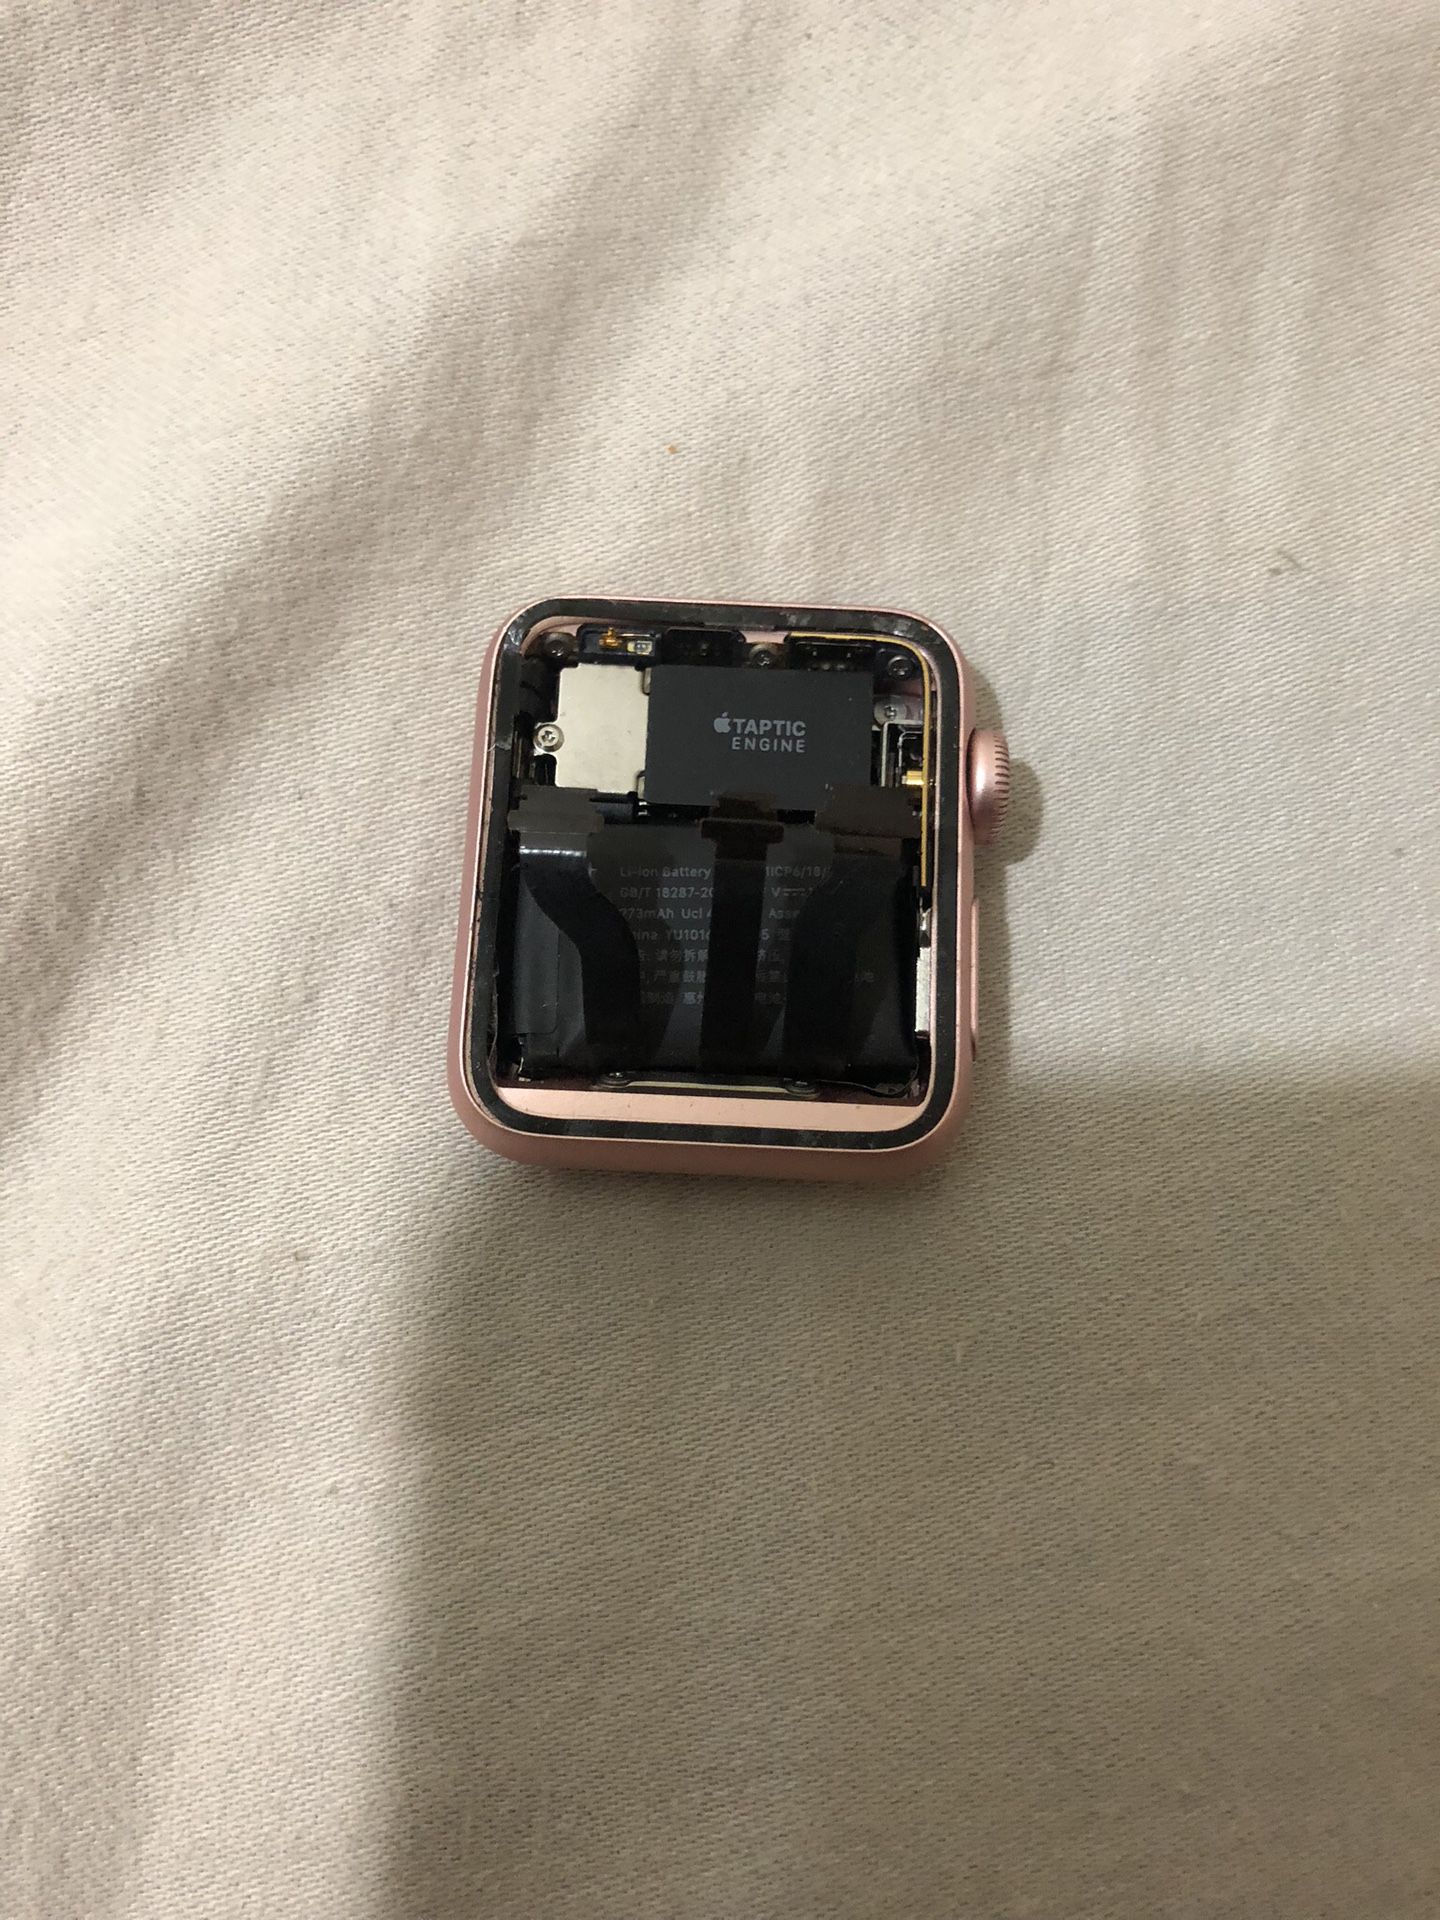 Apple Watch Series 2 38mm (For Parts)